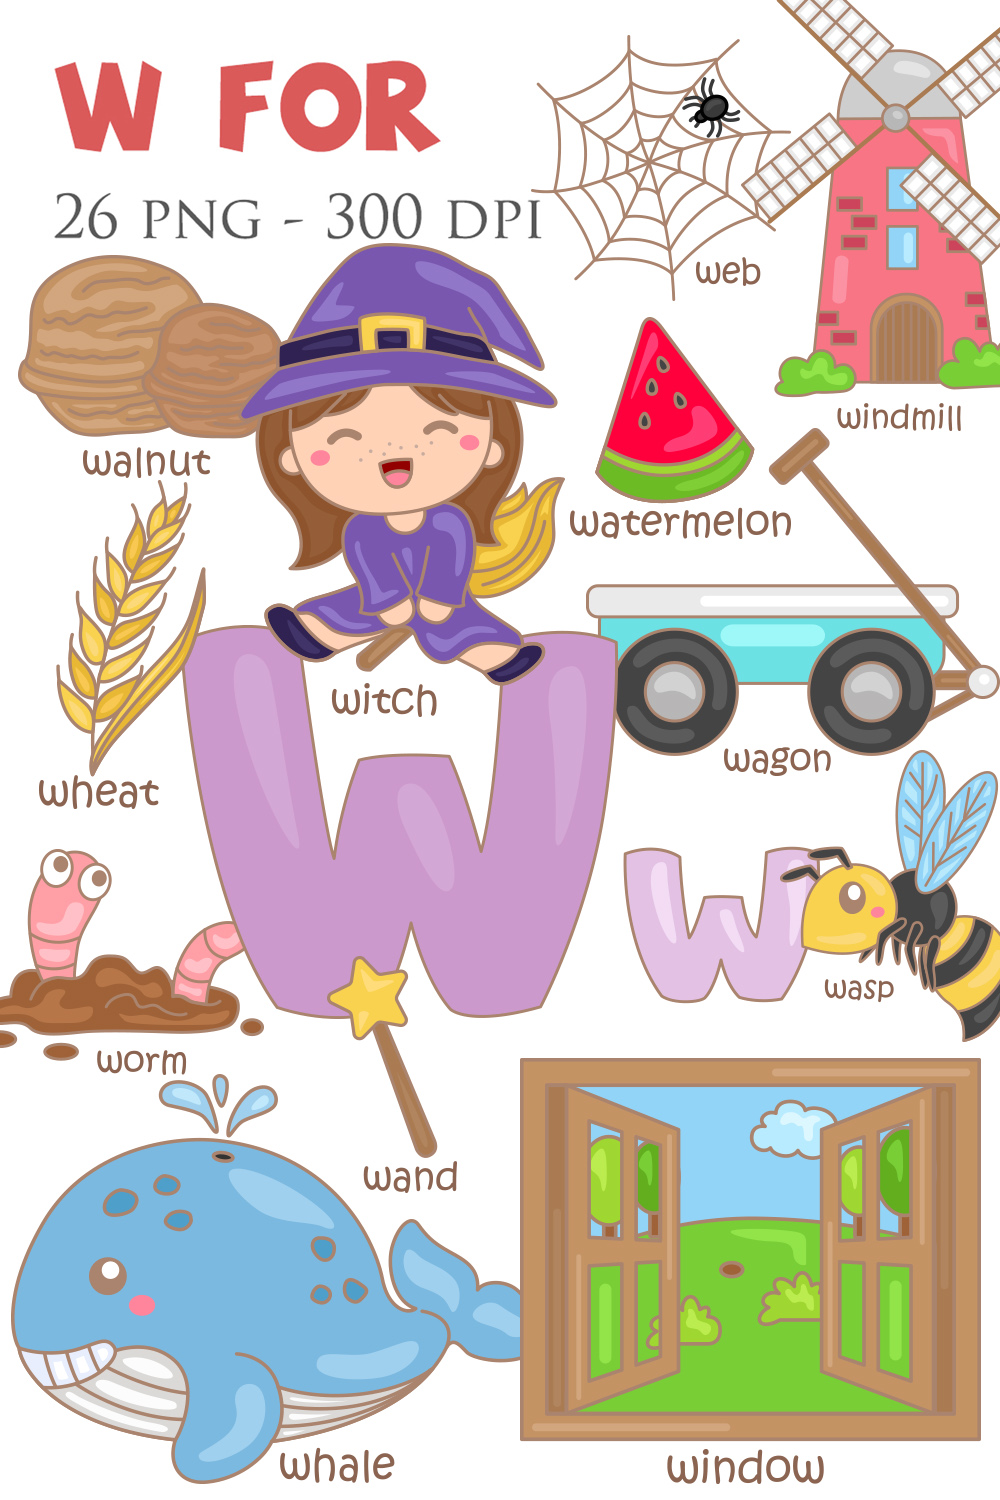 Alphabet W For Vocabulary School Letter Reading Writing Font Study Learning Student Toodler Kids Witch Wagon Web Worm Whale Watermelon Wheat Wand Window Windmill Walnut Wasp Cartoon Lesson Illustration Vector Clipart Sticker pinterest preview image.